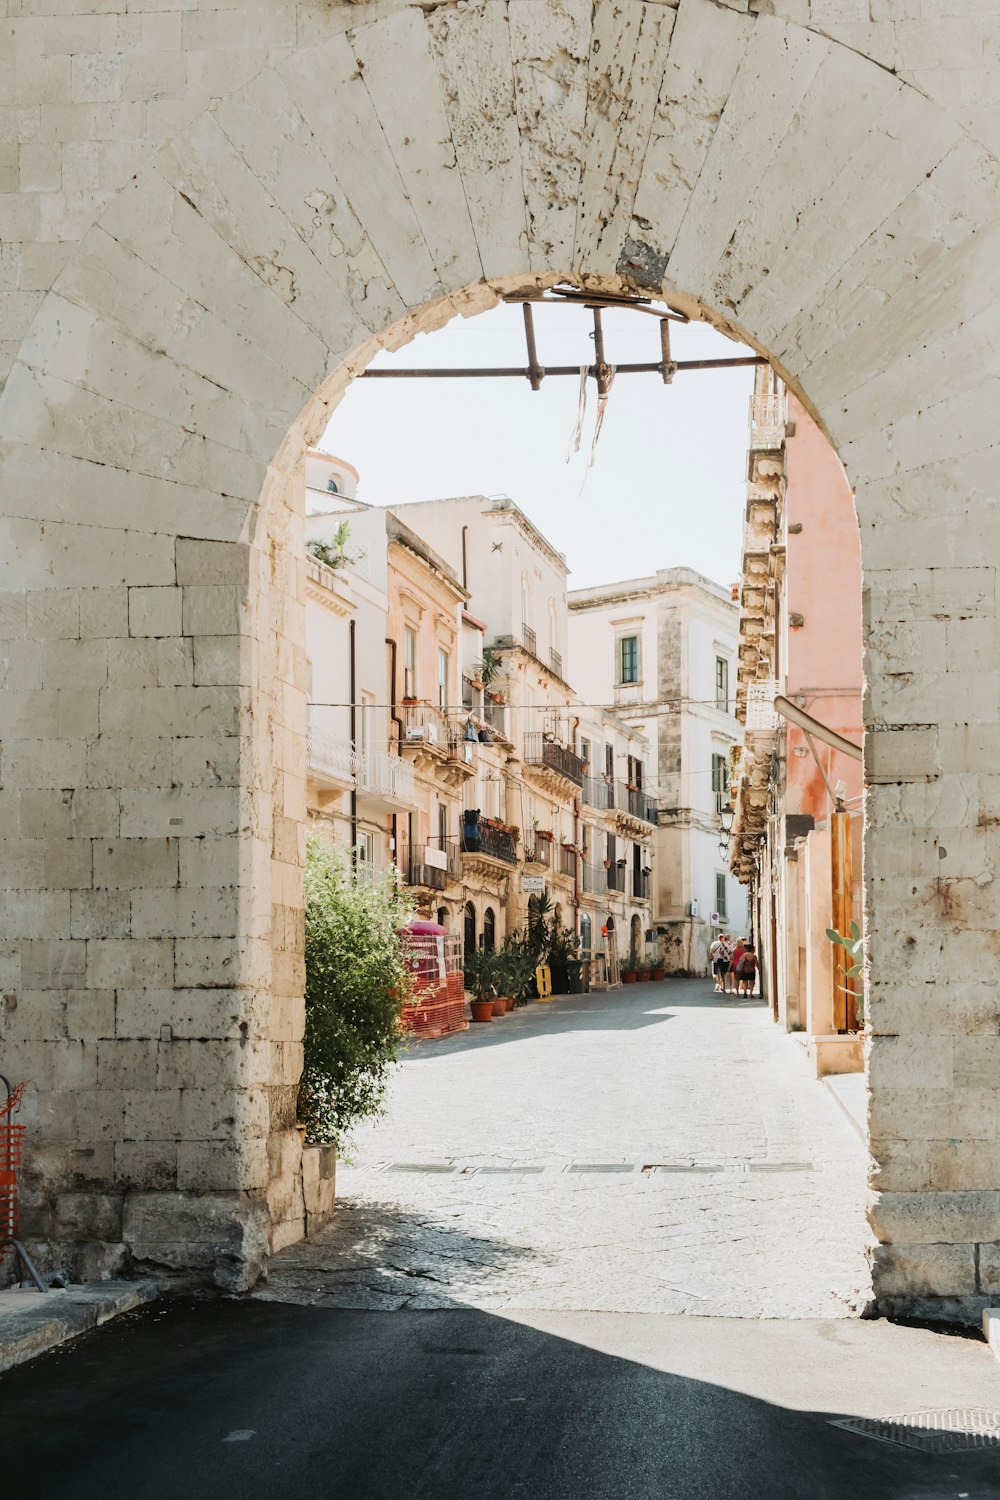 an arch in a stone wall leads into an empty street